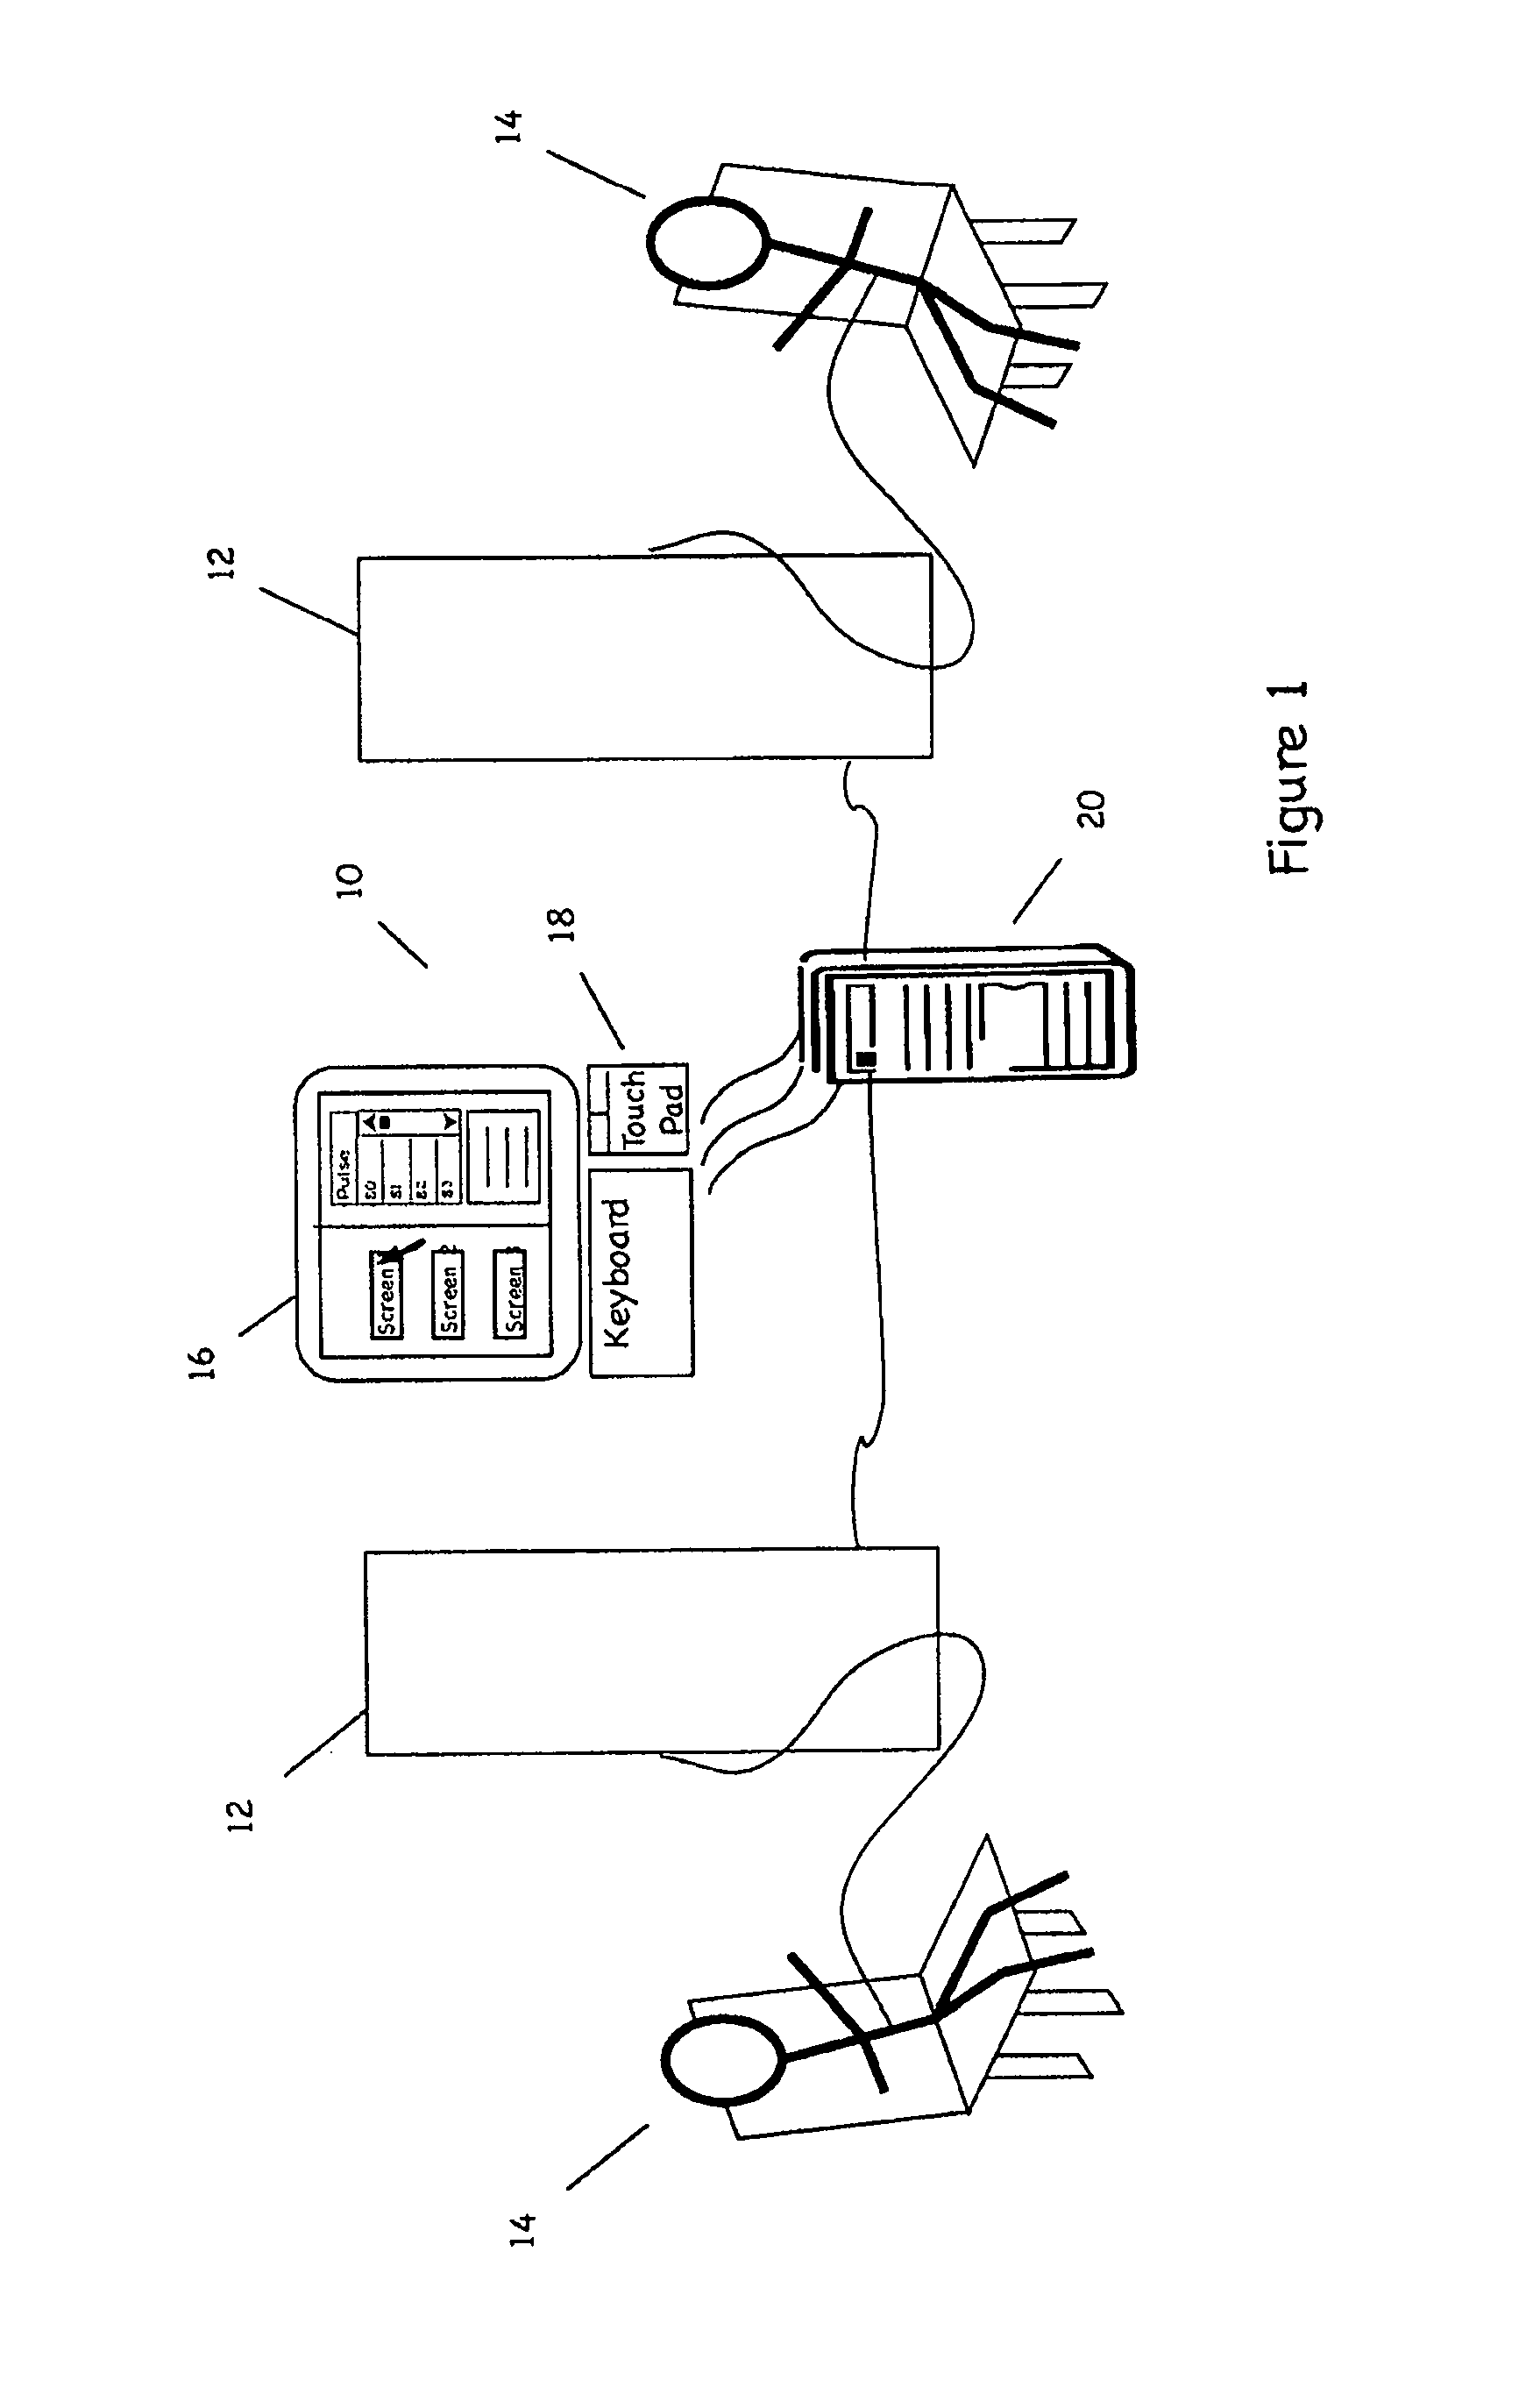 Methods and apparatus for medical device cursor control and touchpad-based navigation